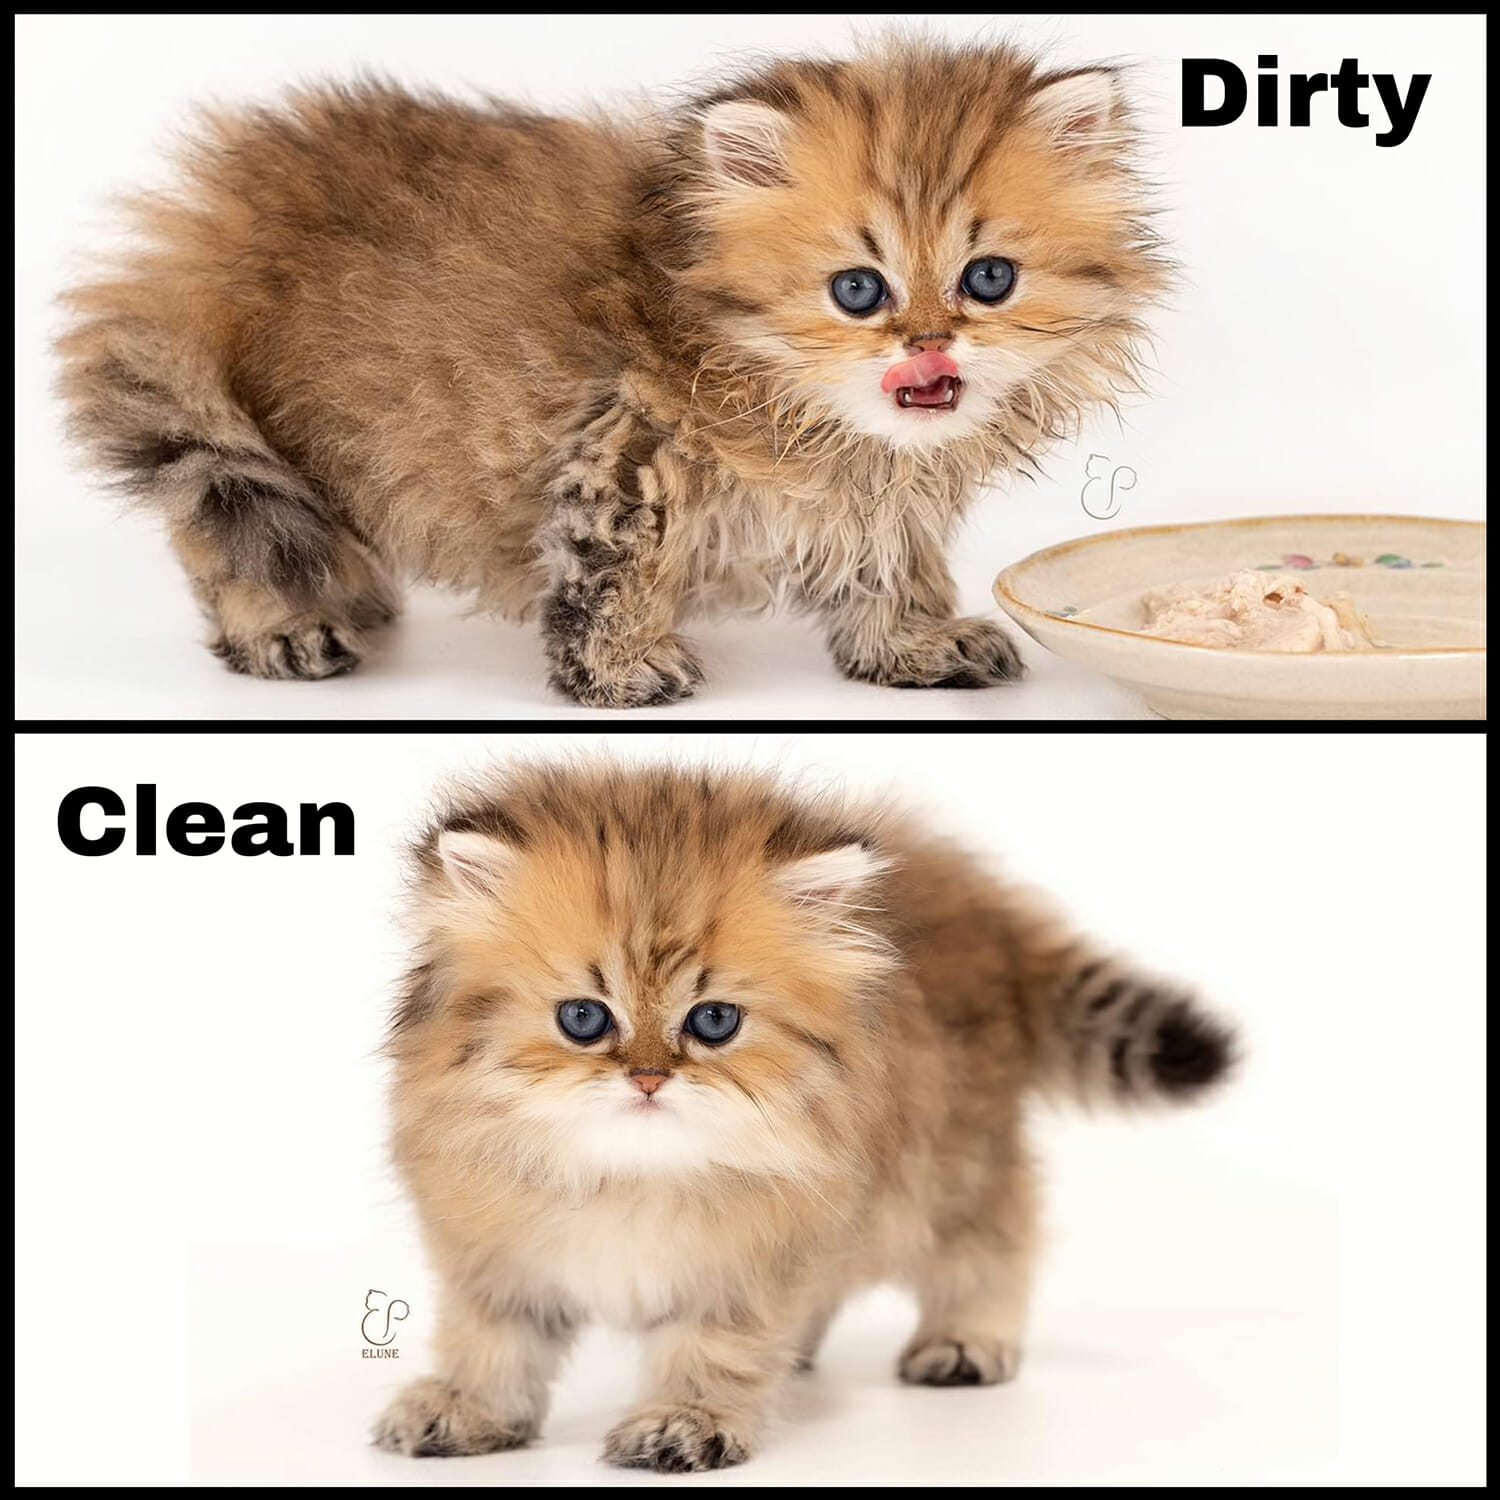 Dirty golden persian kitten with oils in coat compared to clean persian kitten after bath.